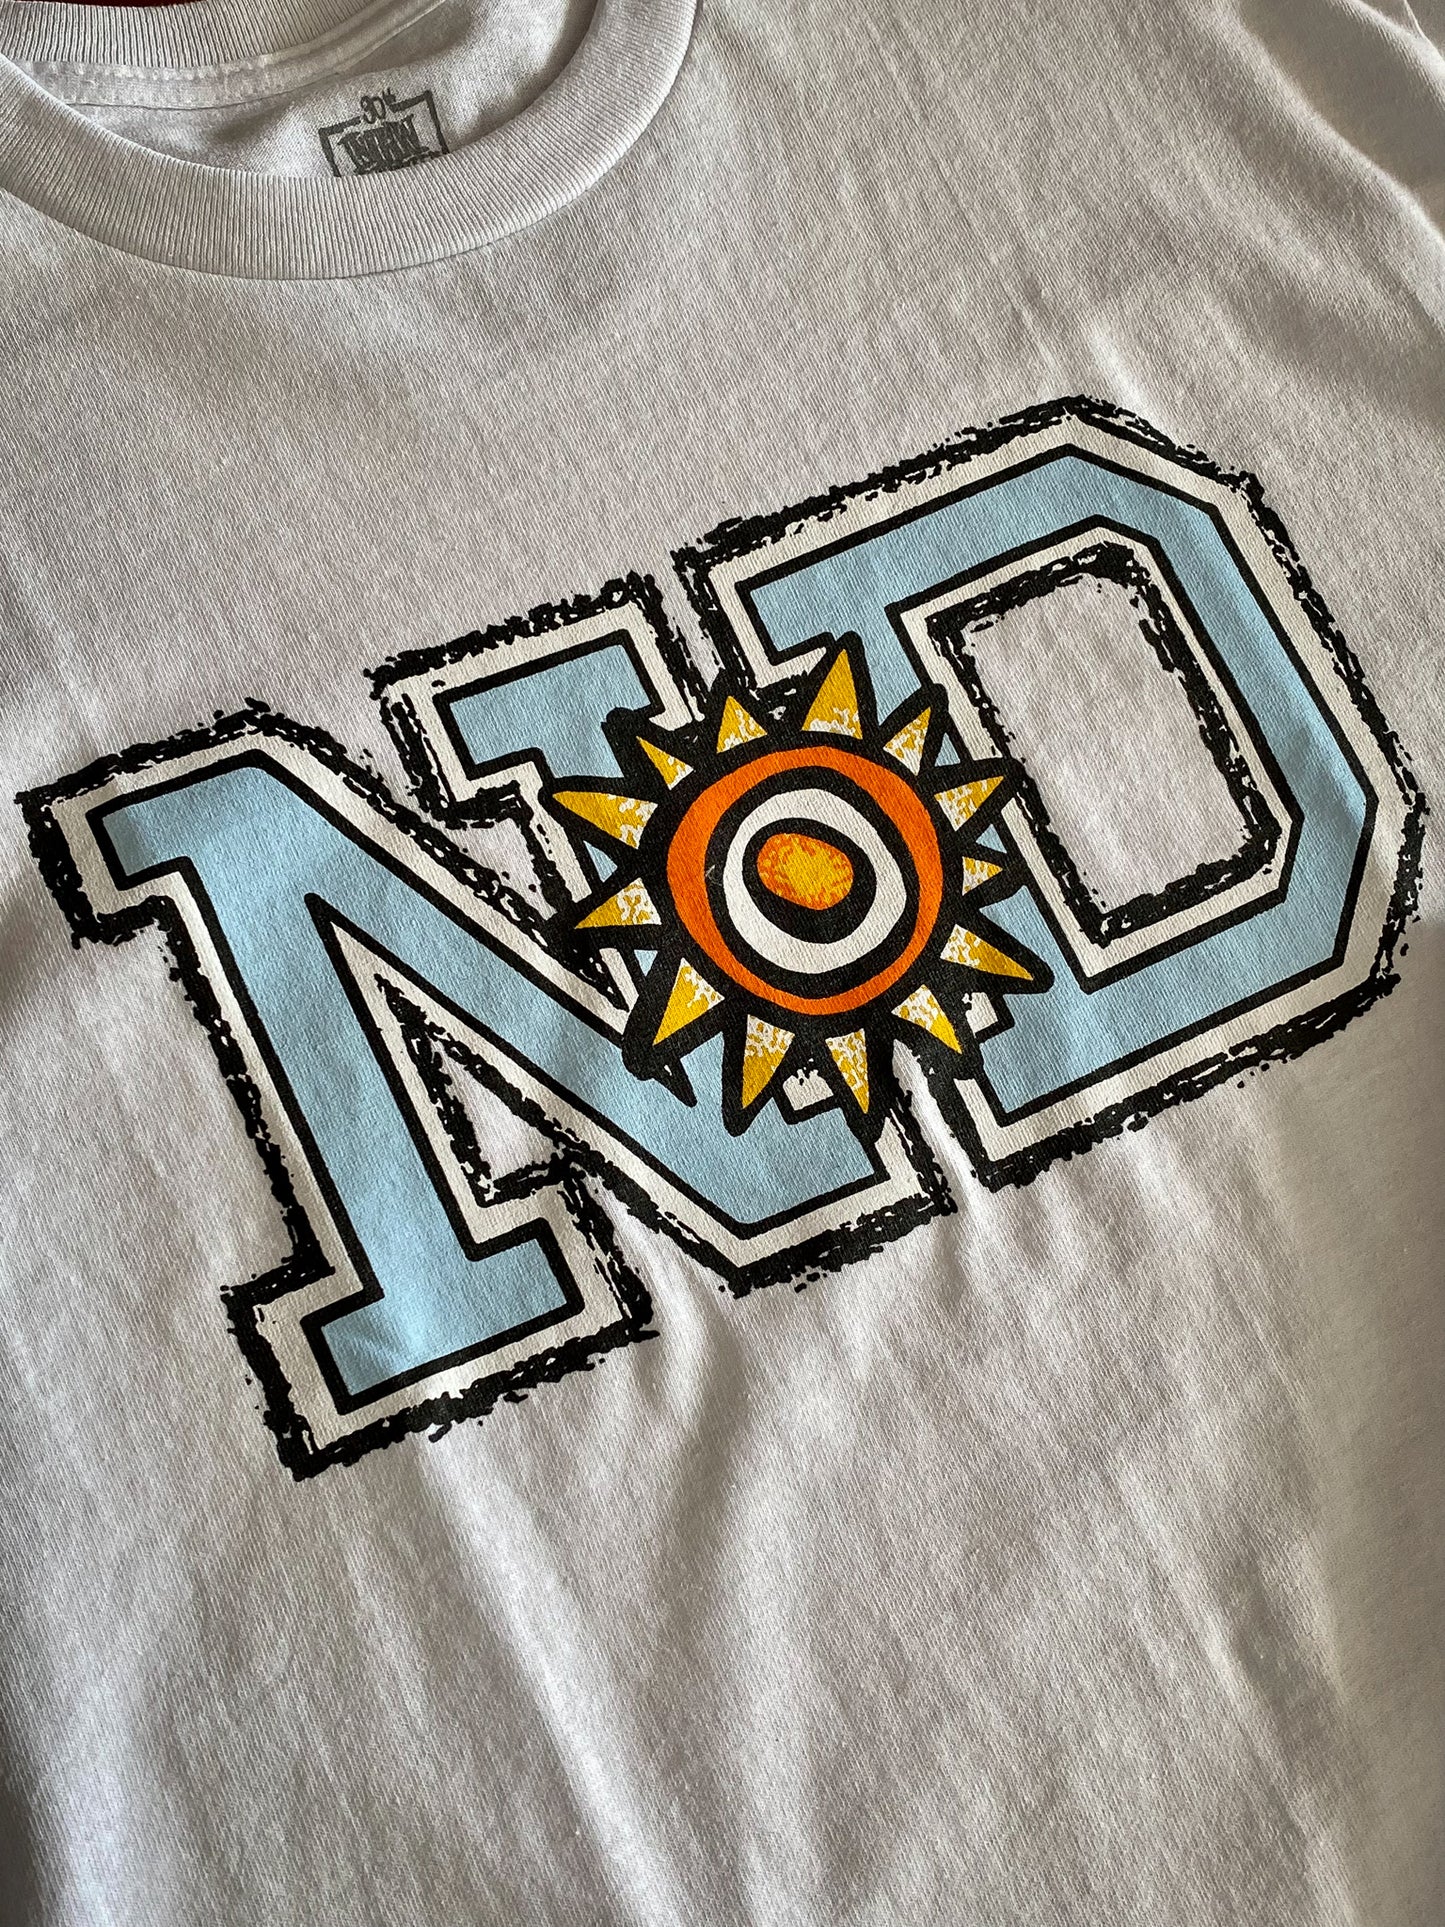 NEW DEAL - ND TEE - WHITE